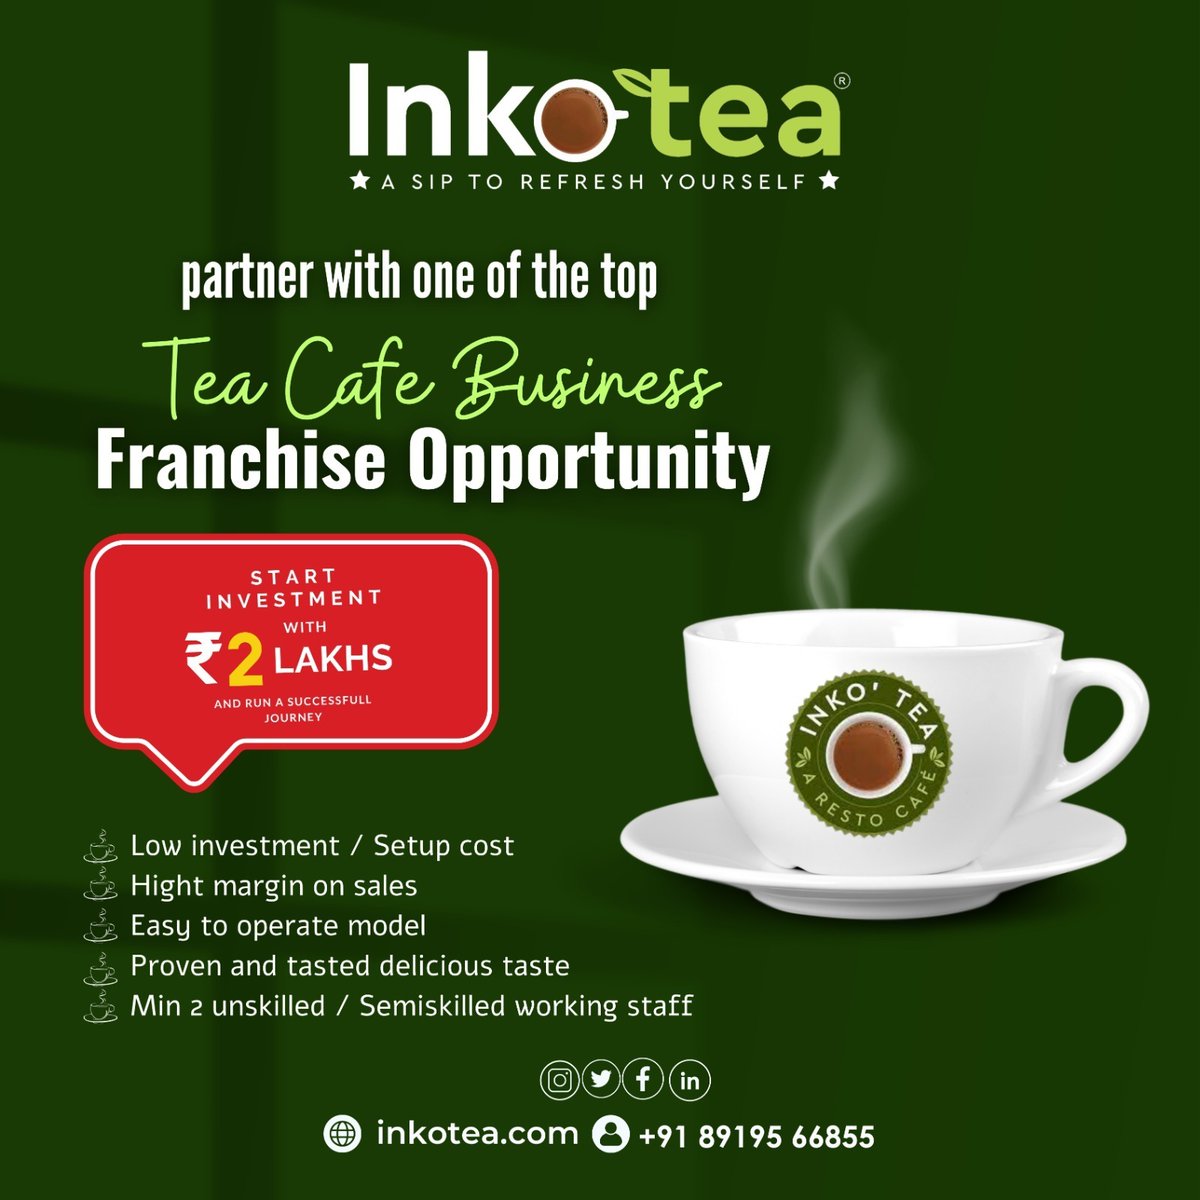 🍵 Welcome to Inkotea! 🍵
Partner with one of the top Tea Cafe Business Franchise Opportunities and start your investment journey with just 2 lakhs.
#Inkotea #BusinessFranchise #franchisebusiness #teafranchise #hyderabadcafes #teaoutlet #teaaddict #brewtea #tea #rainyseason